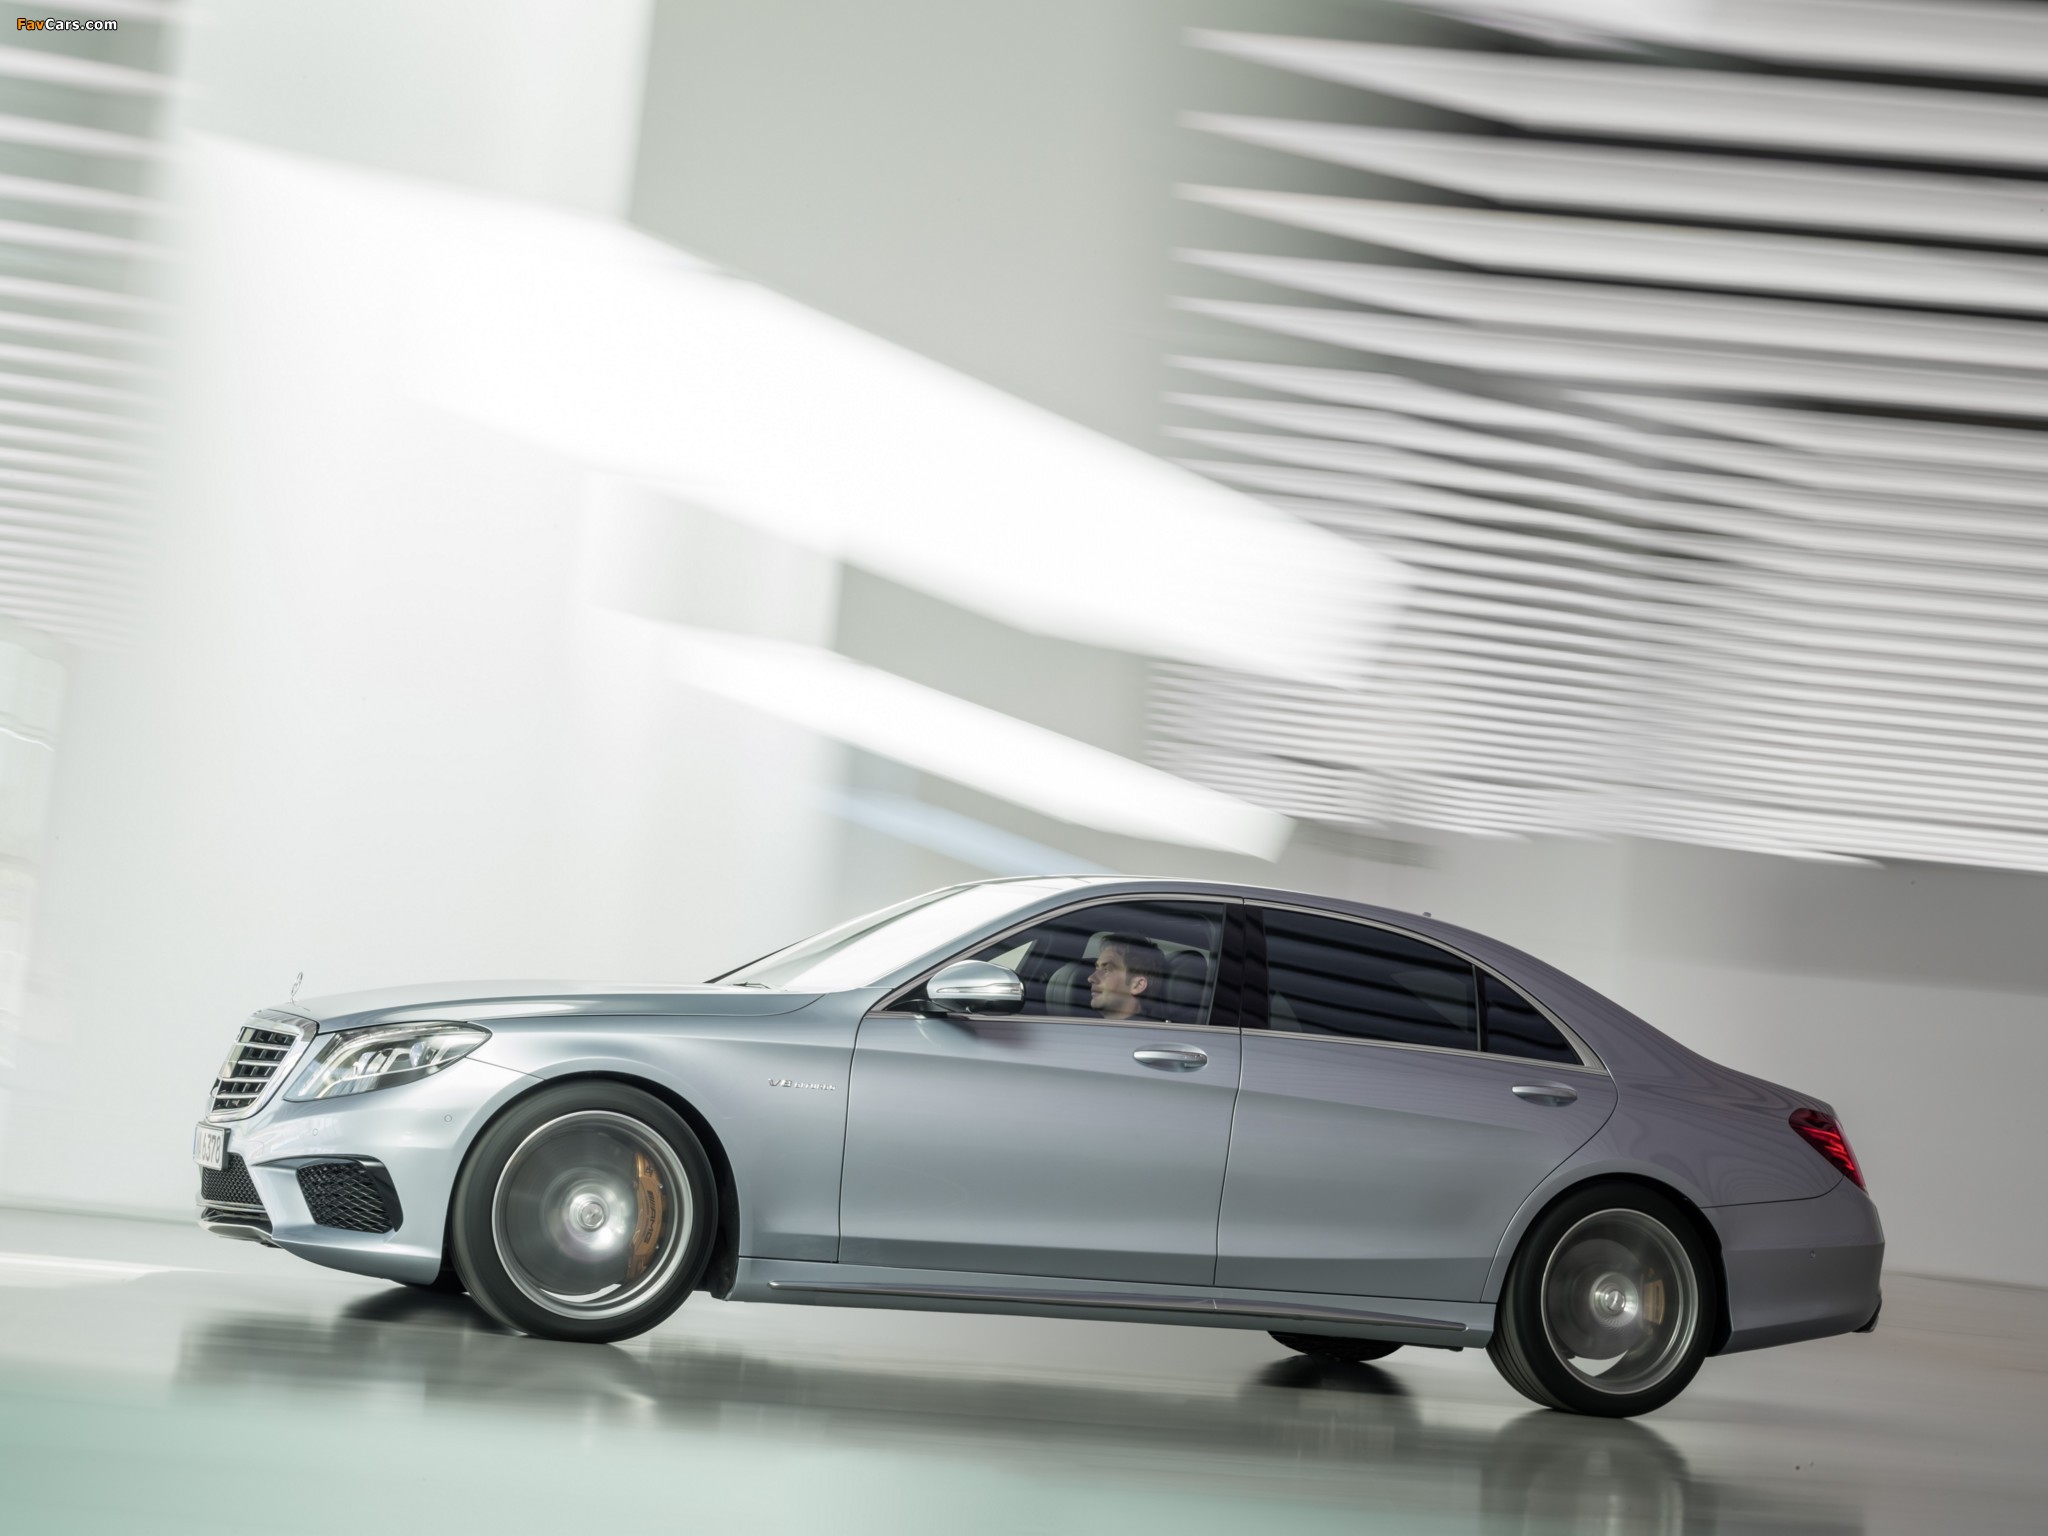 Mercedes-Benz S 63 AMG (W222) 2013 pictures (2048 x 1536)